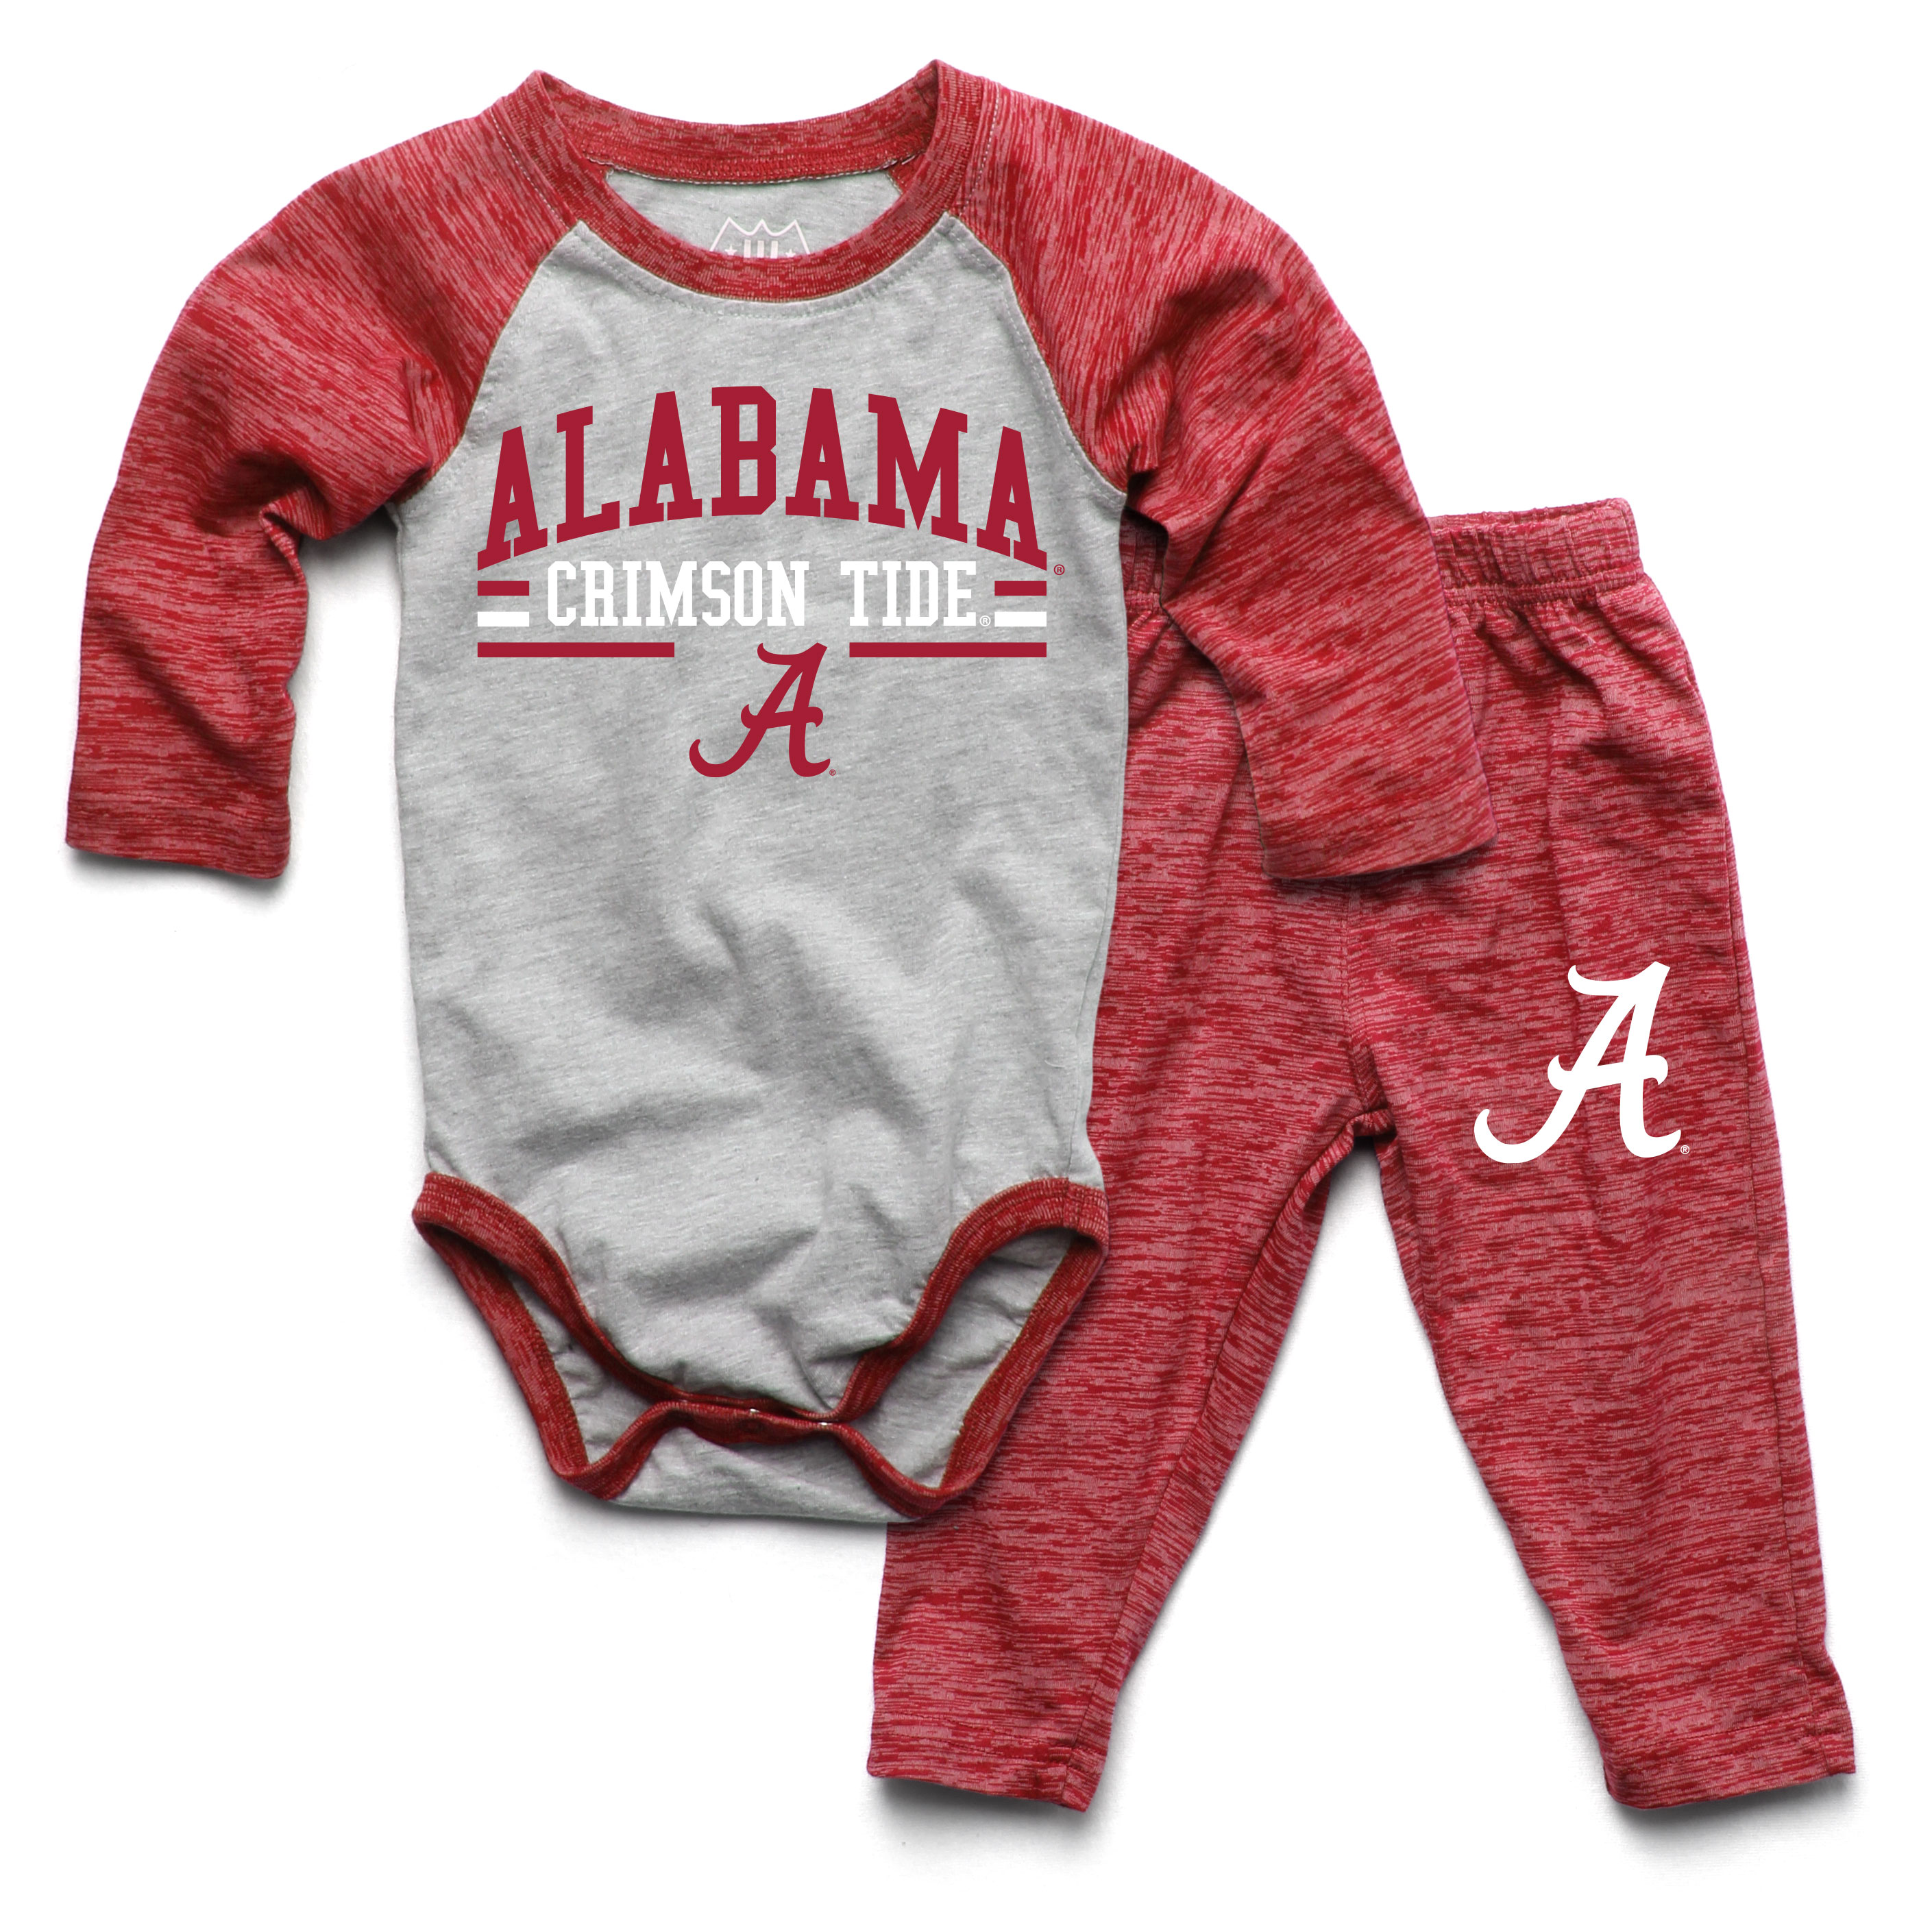 Wes And Willy Alabama Crimson Tide Baby College Team Hopper and Pant Set